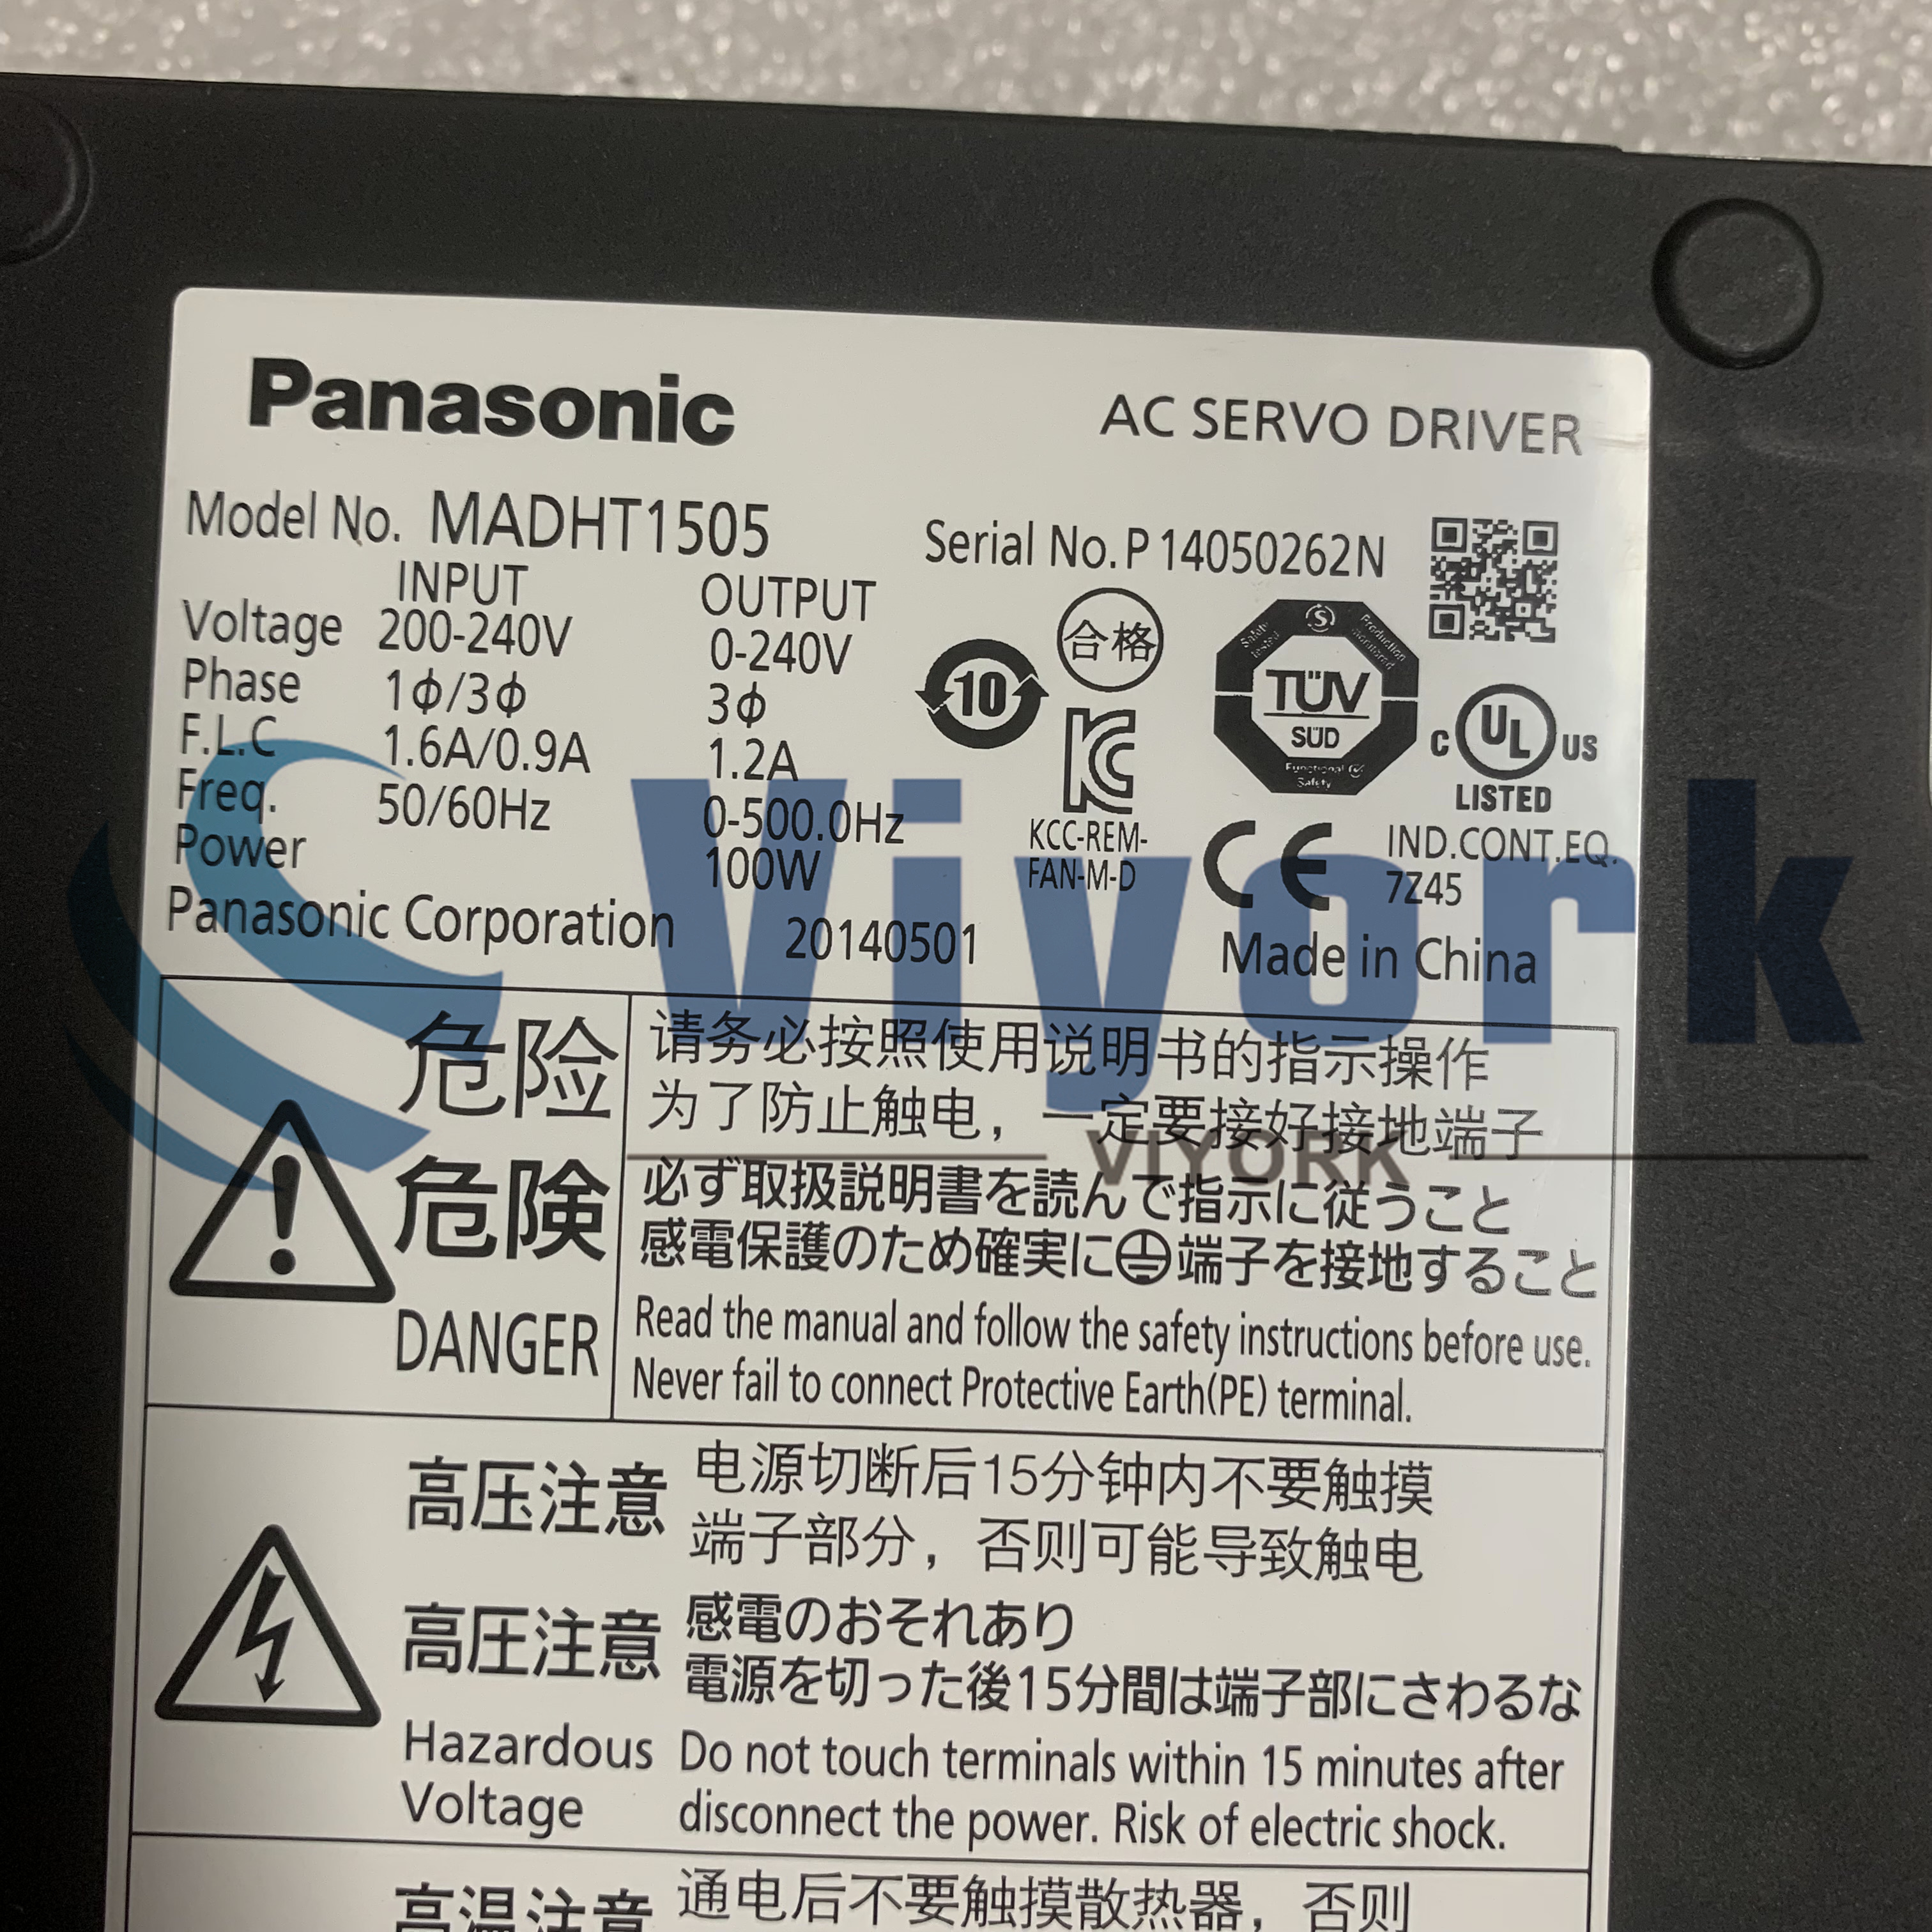 Panasonic MADHT1505 A5 NETWORK DRIVE SINGLE OR 3 PHASE 200-240V A-FRAME NEW